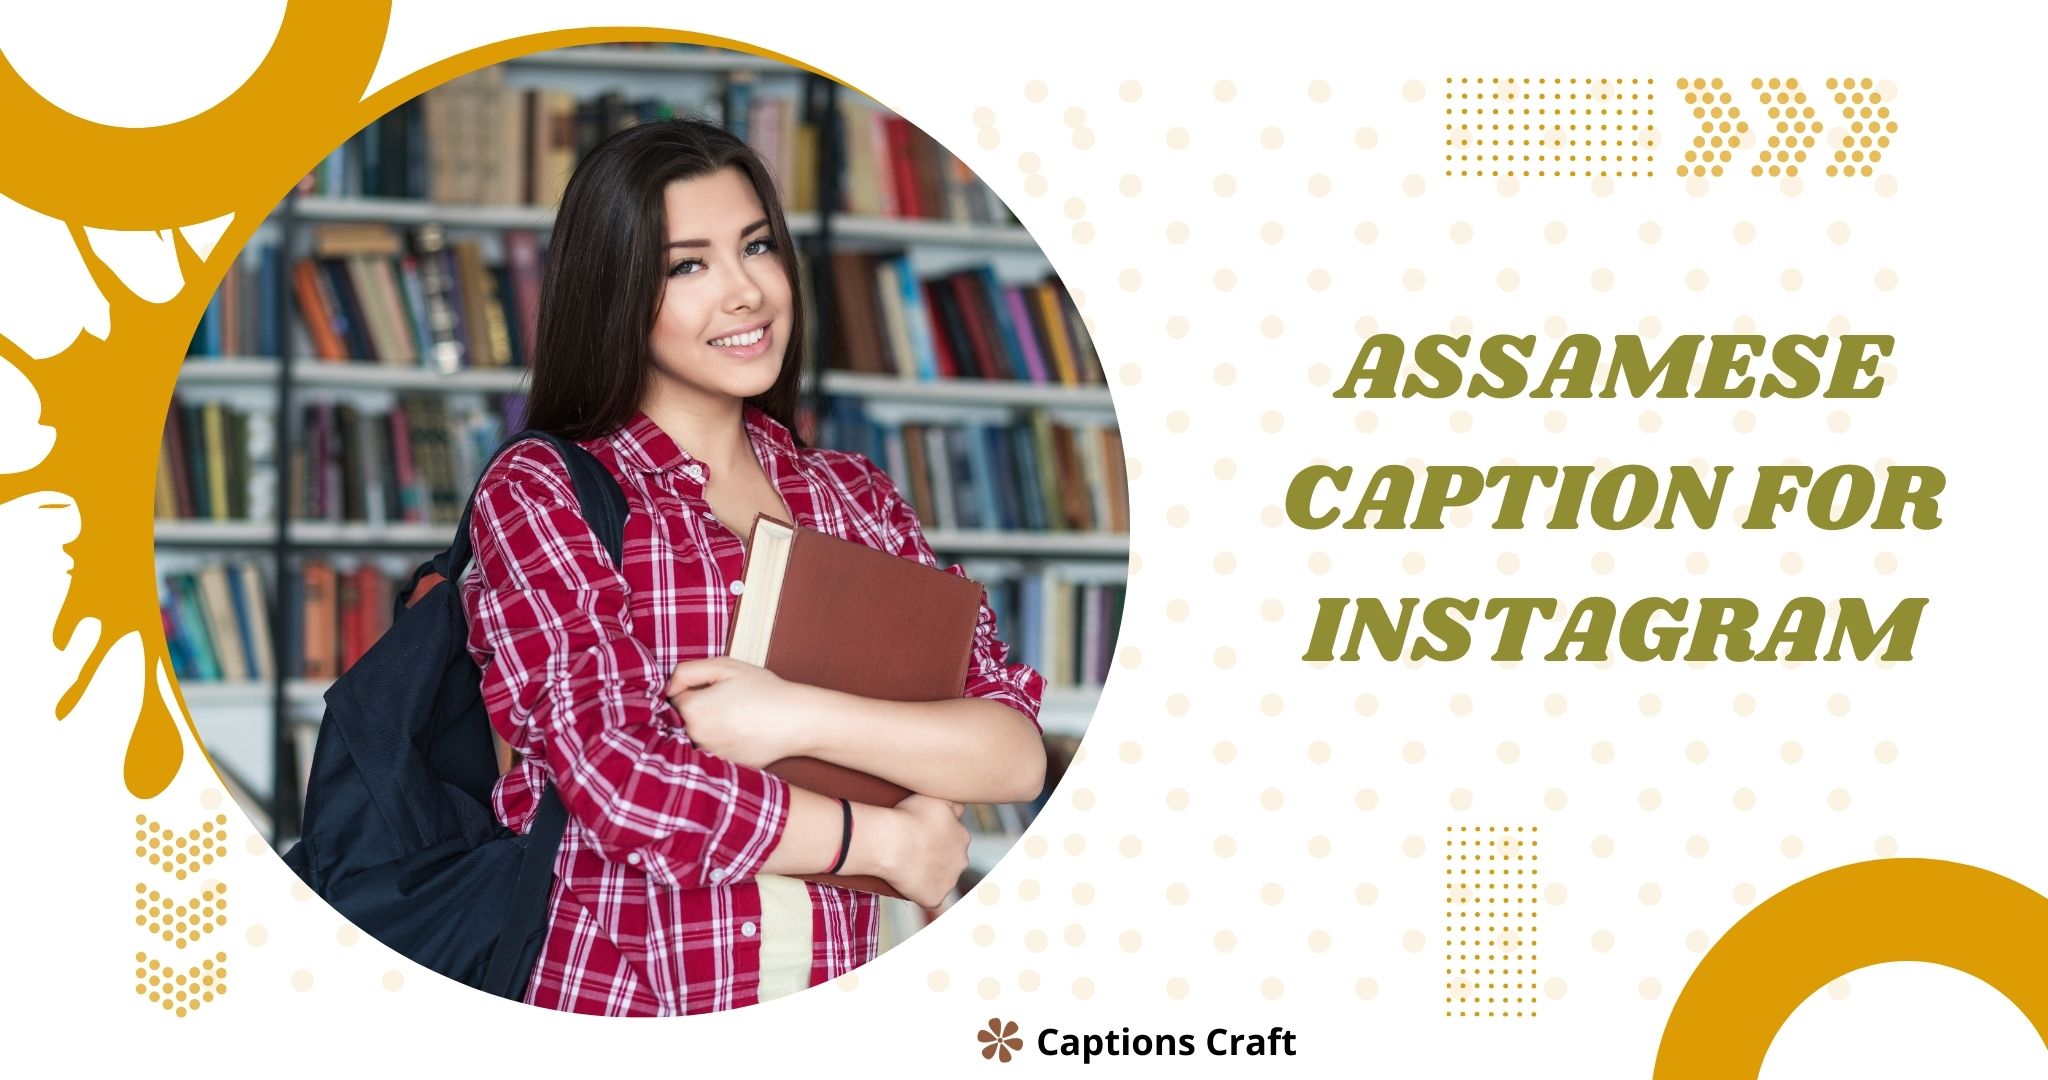 Captain Craft - Assamese captions for Instagram. A creative and unique way to express yourself in Assamese on social media.